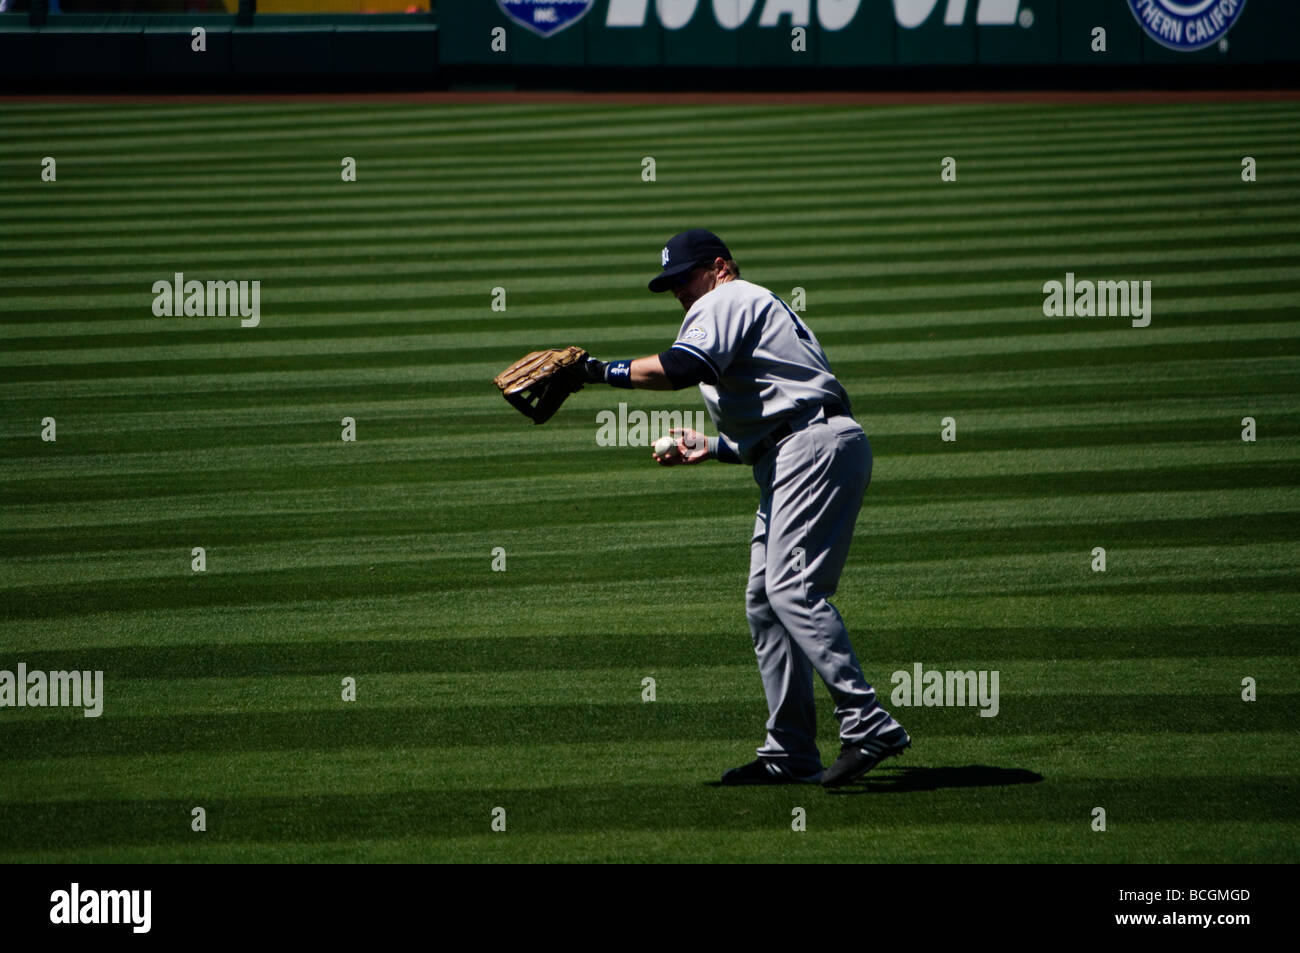 Erik Hinske warms up in right field between innings at an Anaheim/Yankees game. Stock Photo